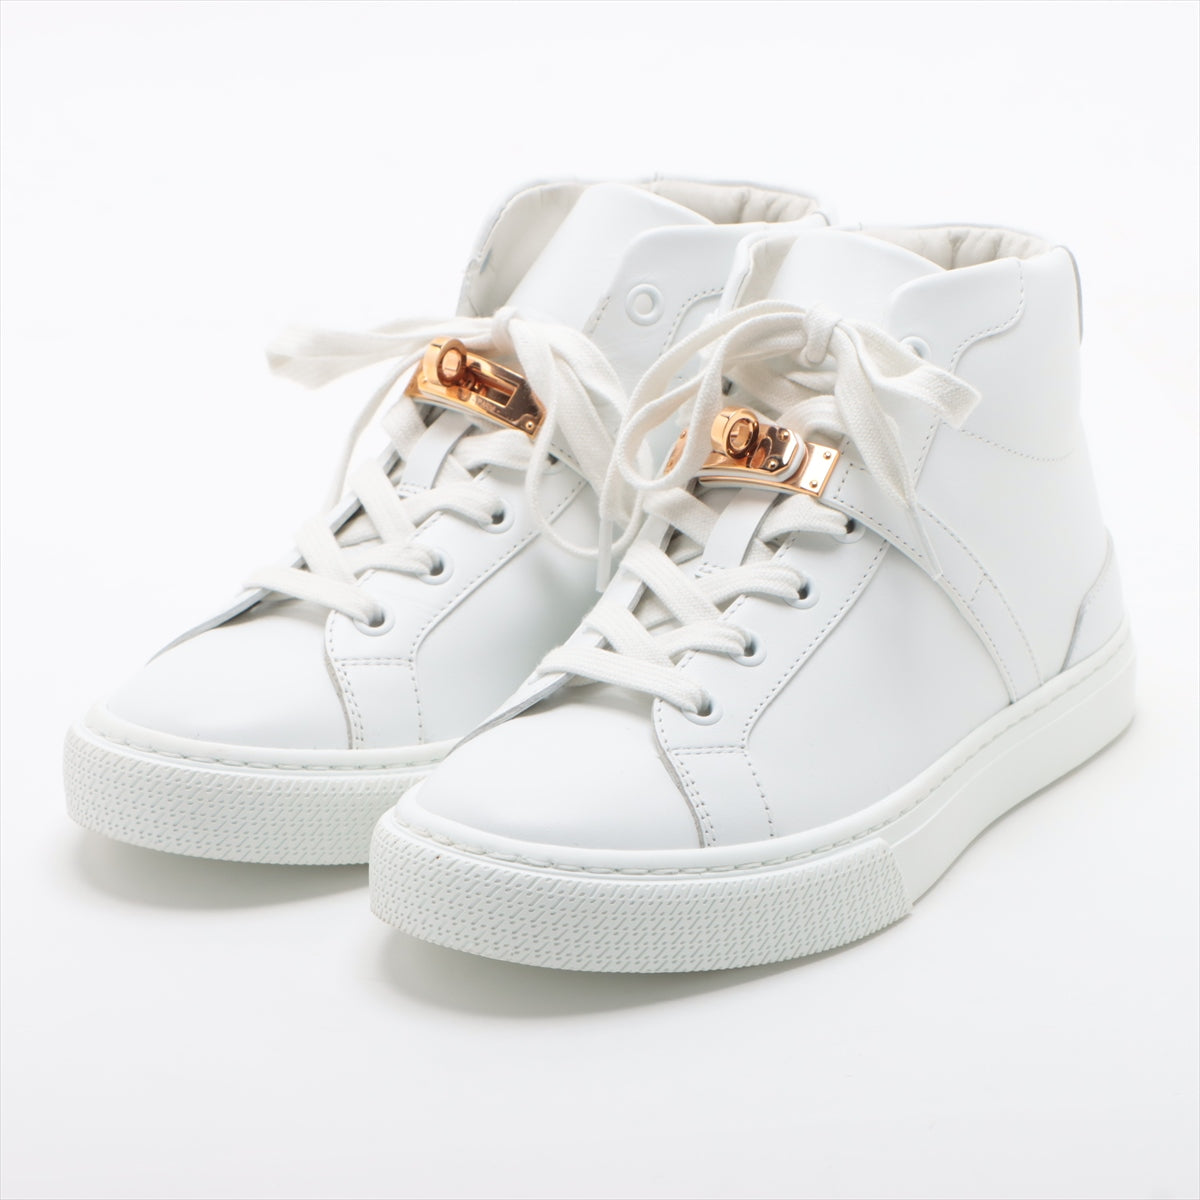 Hermès daydream Leather Sneakers 36 Ladies' White Kelly metal fittings box sack Is there a replacement string